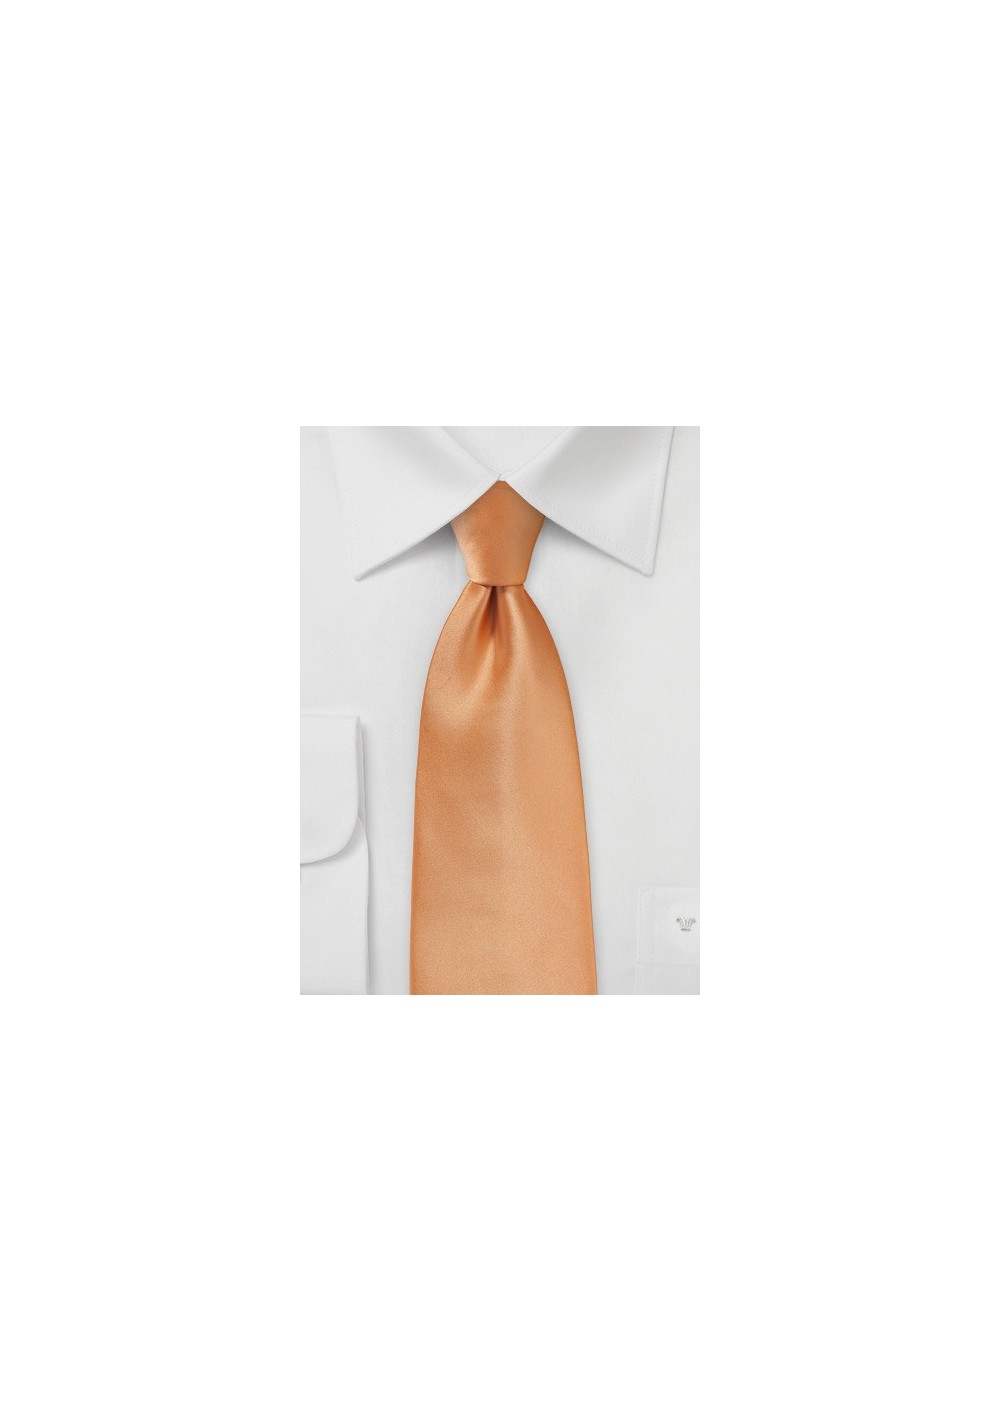 Solid Apricot Colored Tie